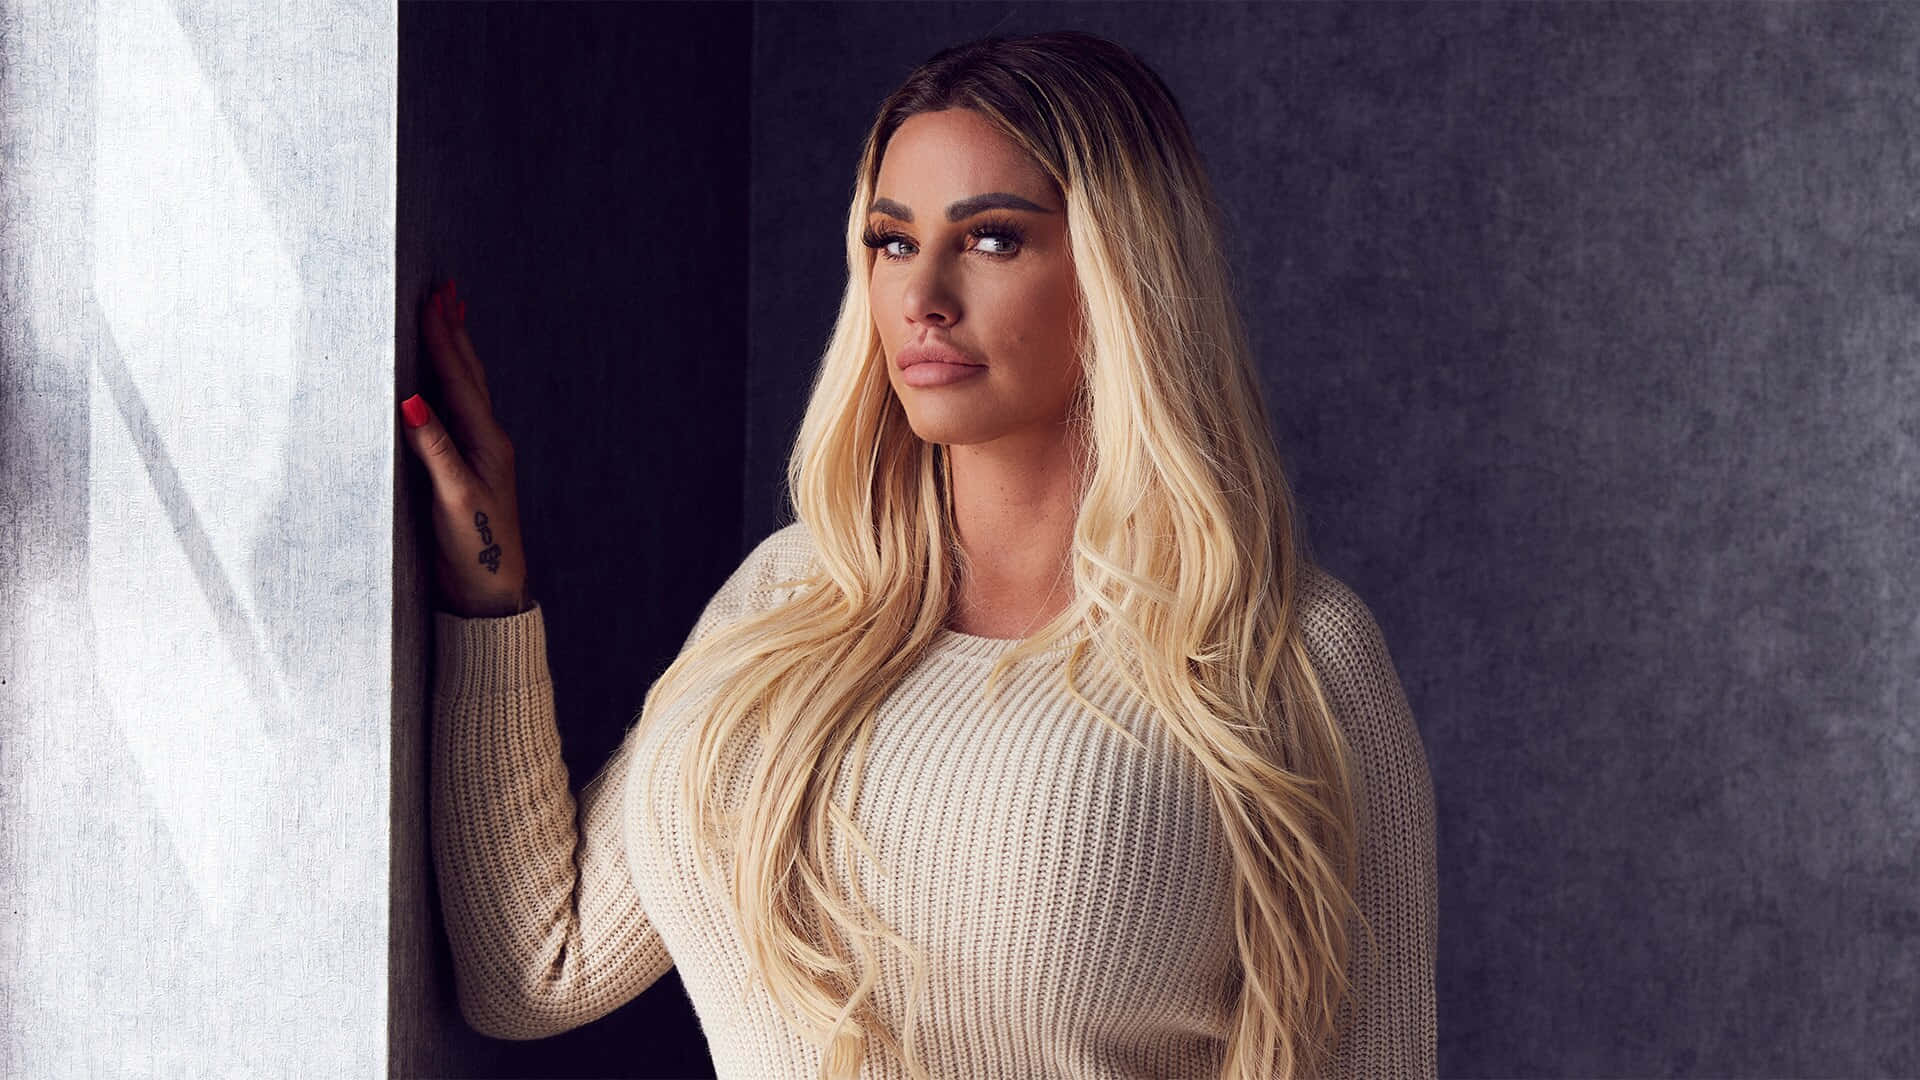 Katie Price, Elegance And Beauty Personified Wallpaper